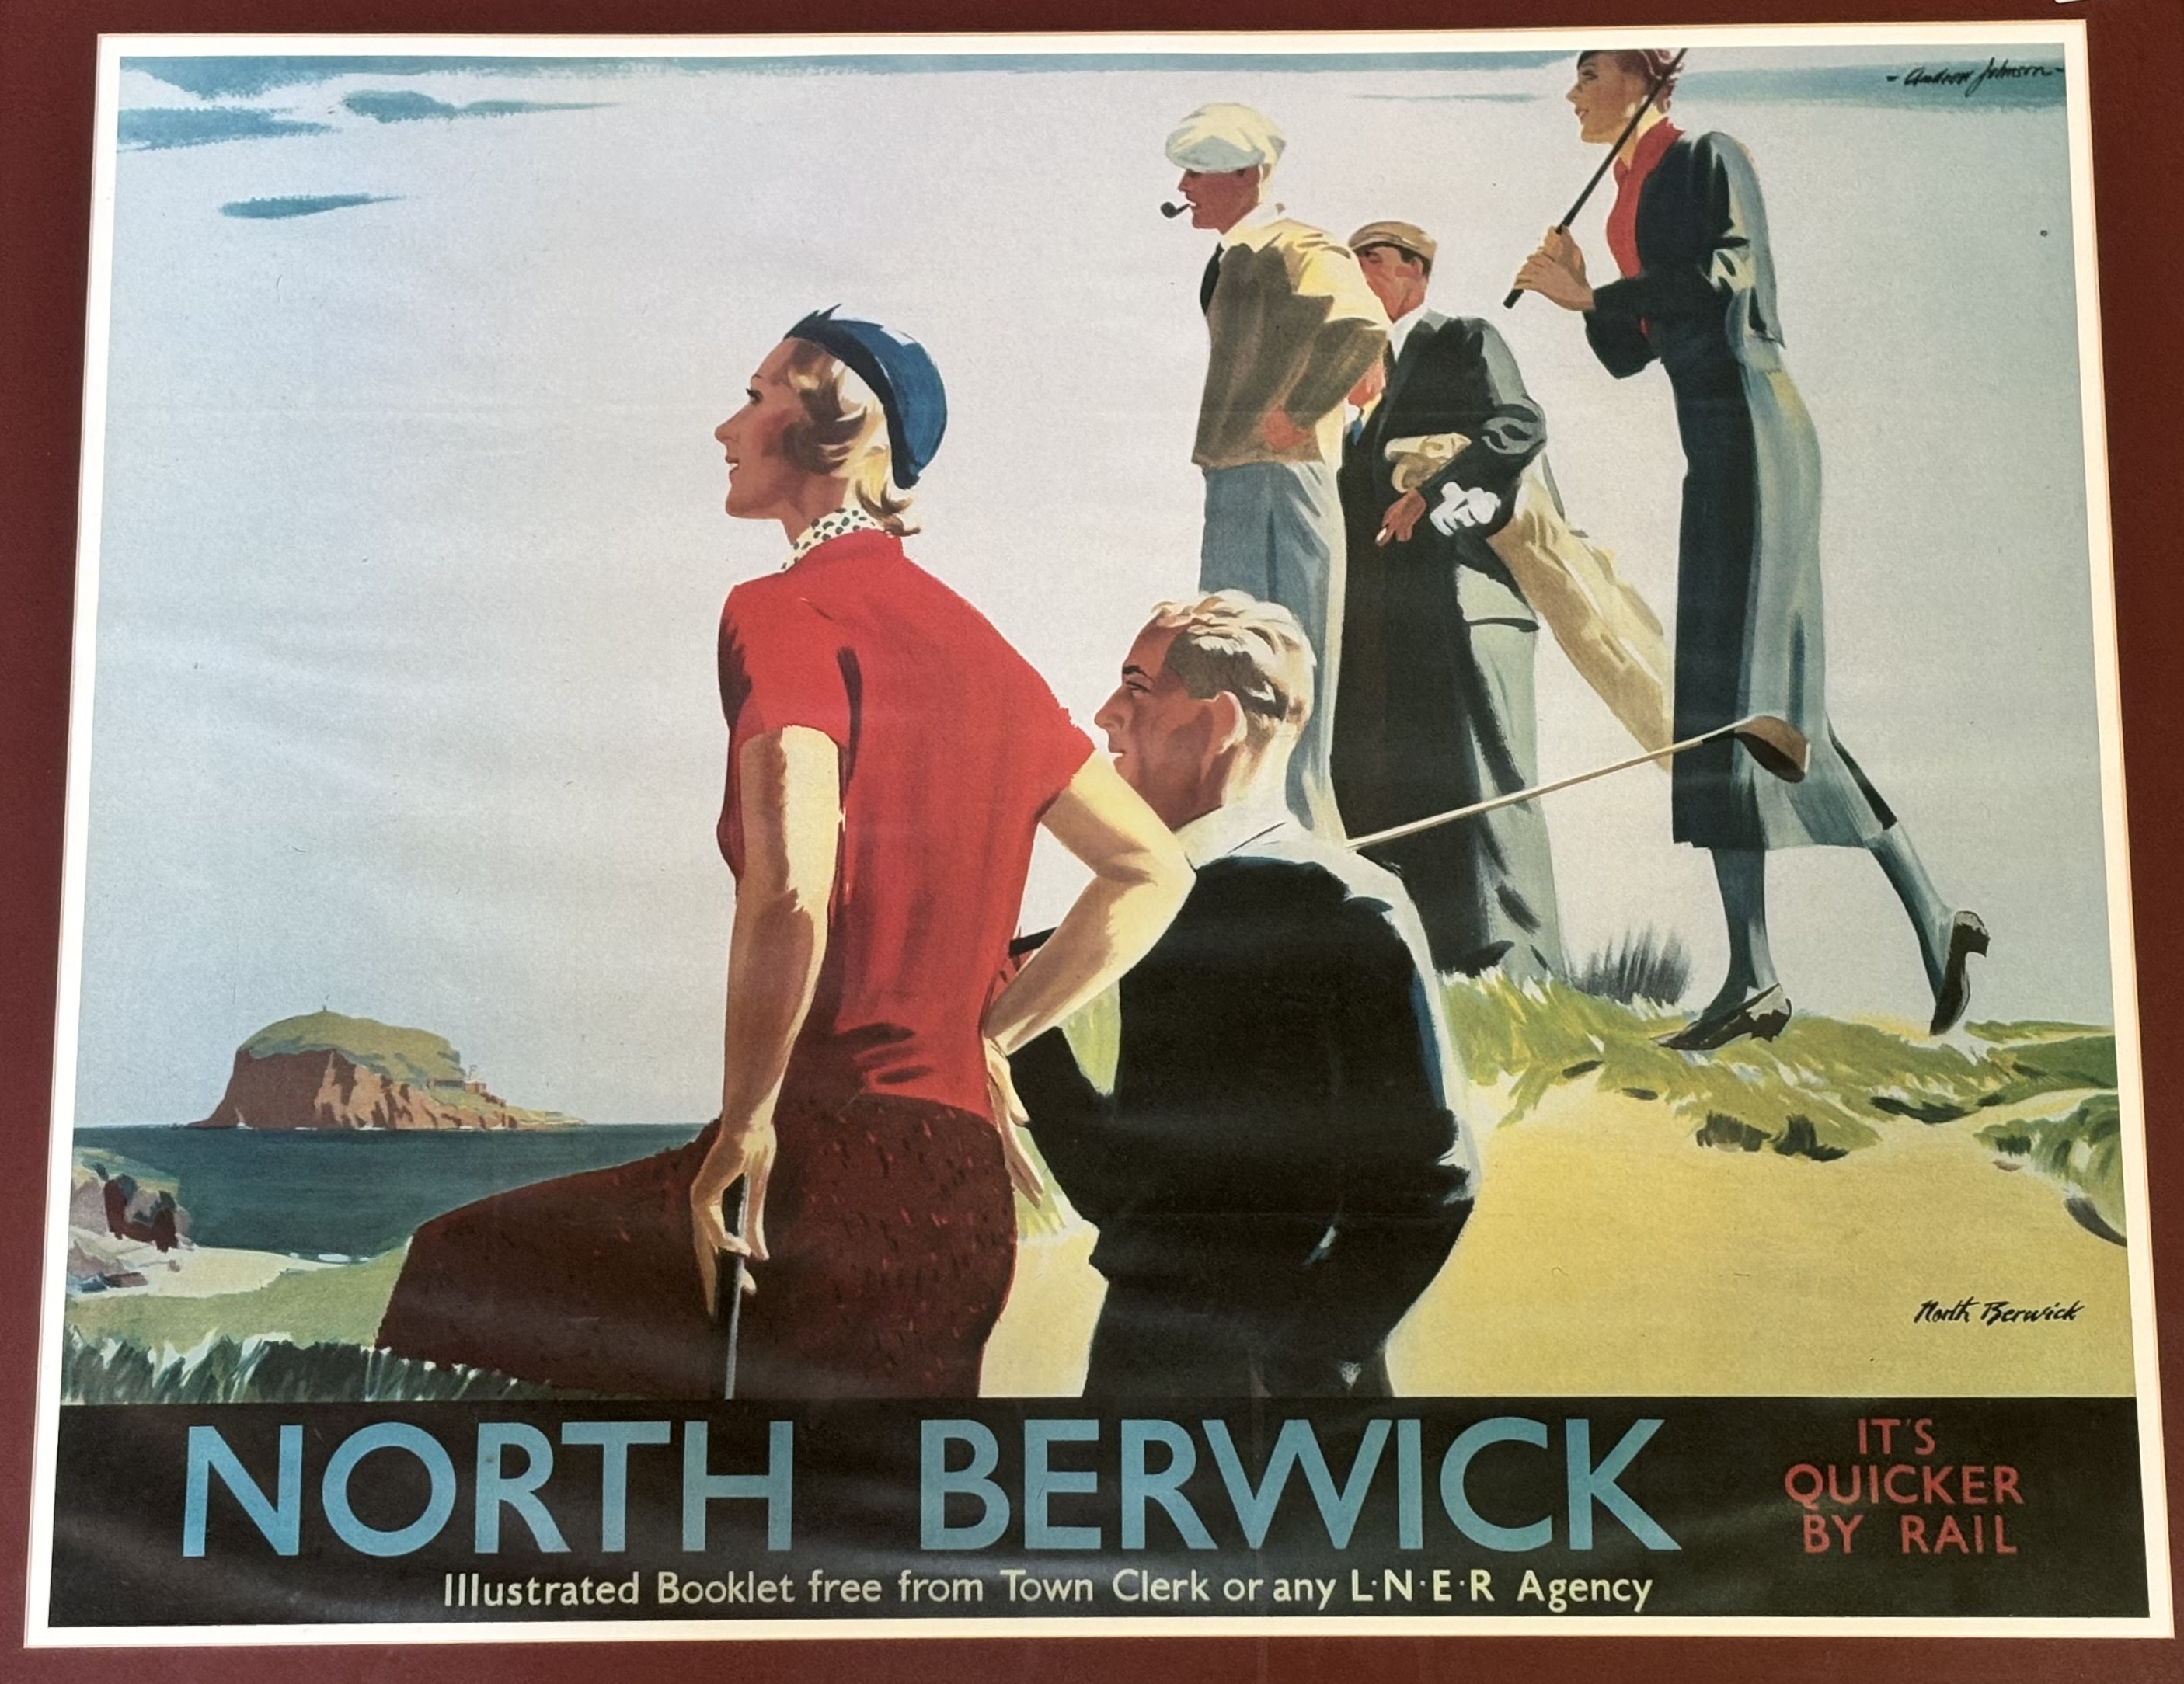 A vintage LNER travel poster for North Berwick by Andrew Johnston, in a wooden frame. (60cmx74cm)